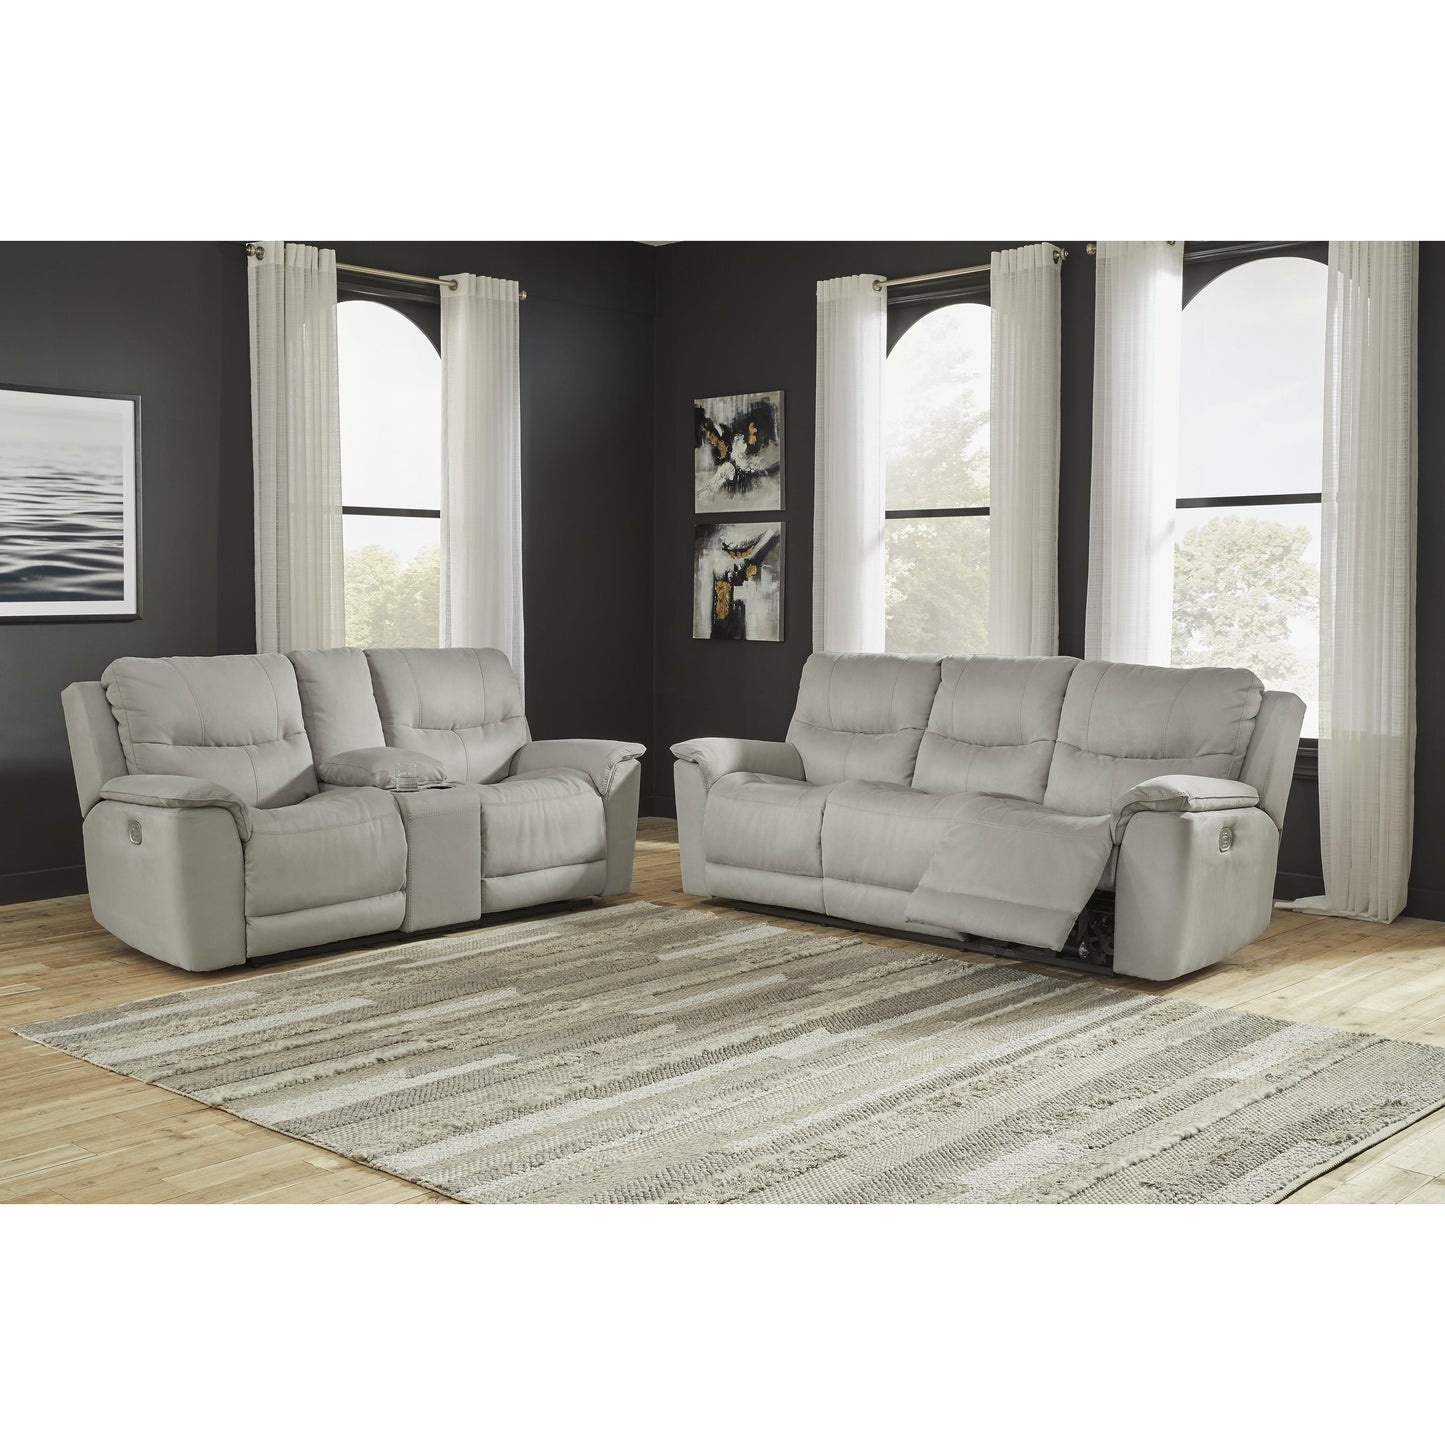 Signature Design by Ashley Next-Gen Gaucho Power Reclining Leather Look Sofa 6080615 IMAGE 8